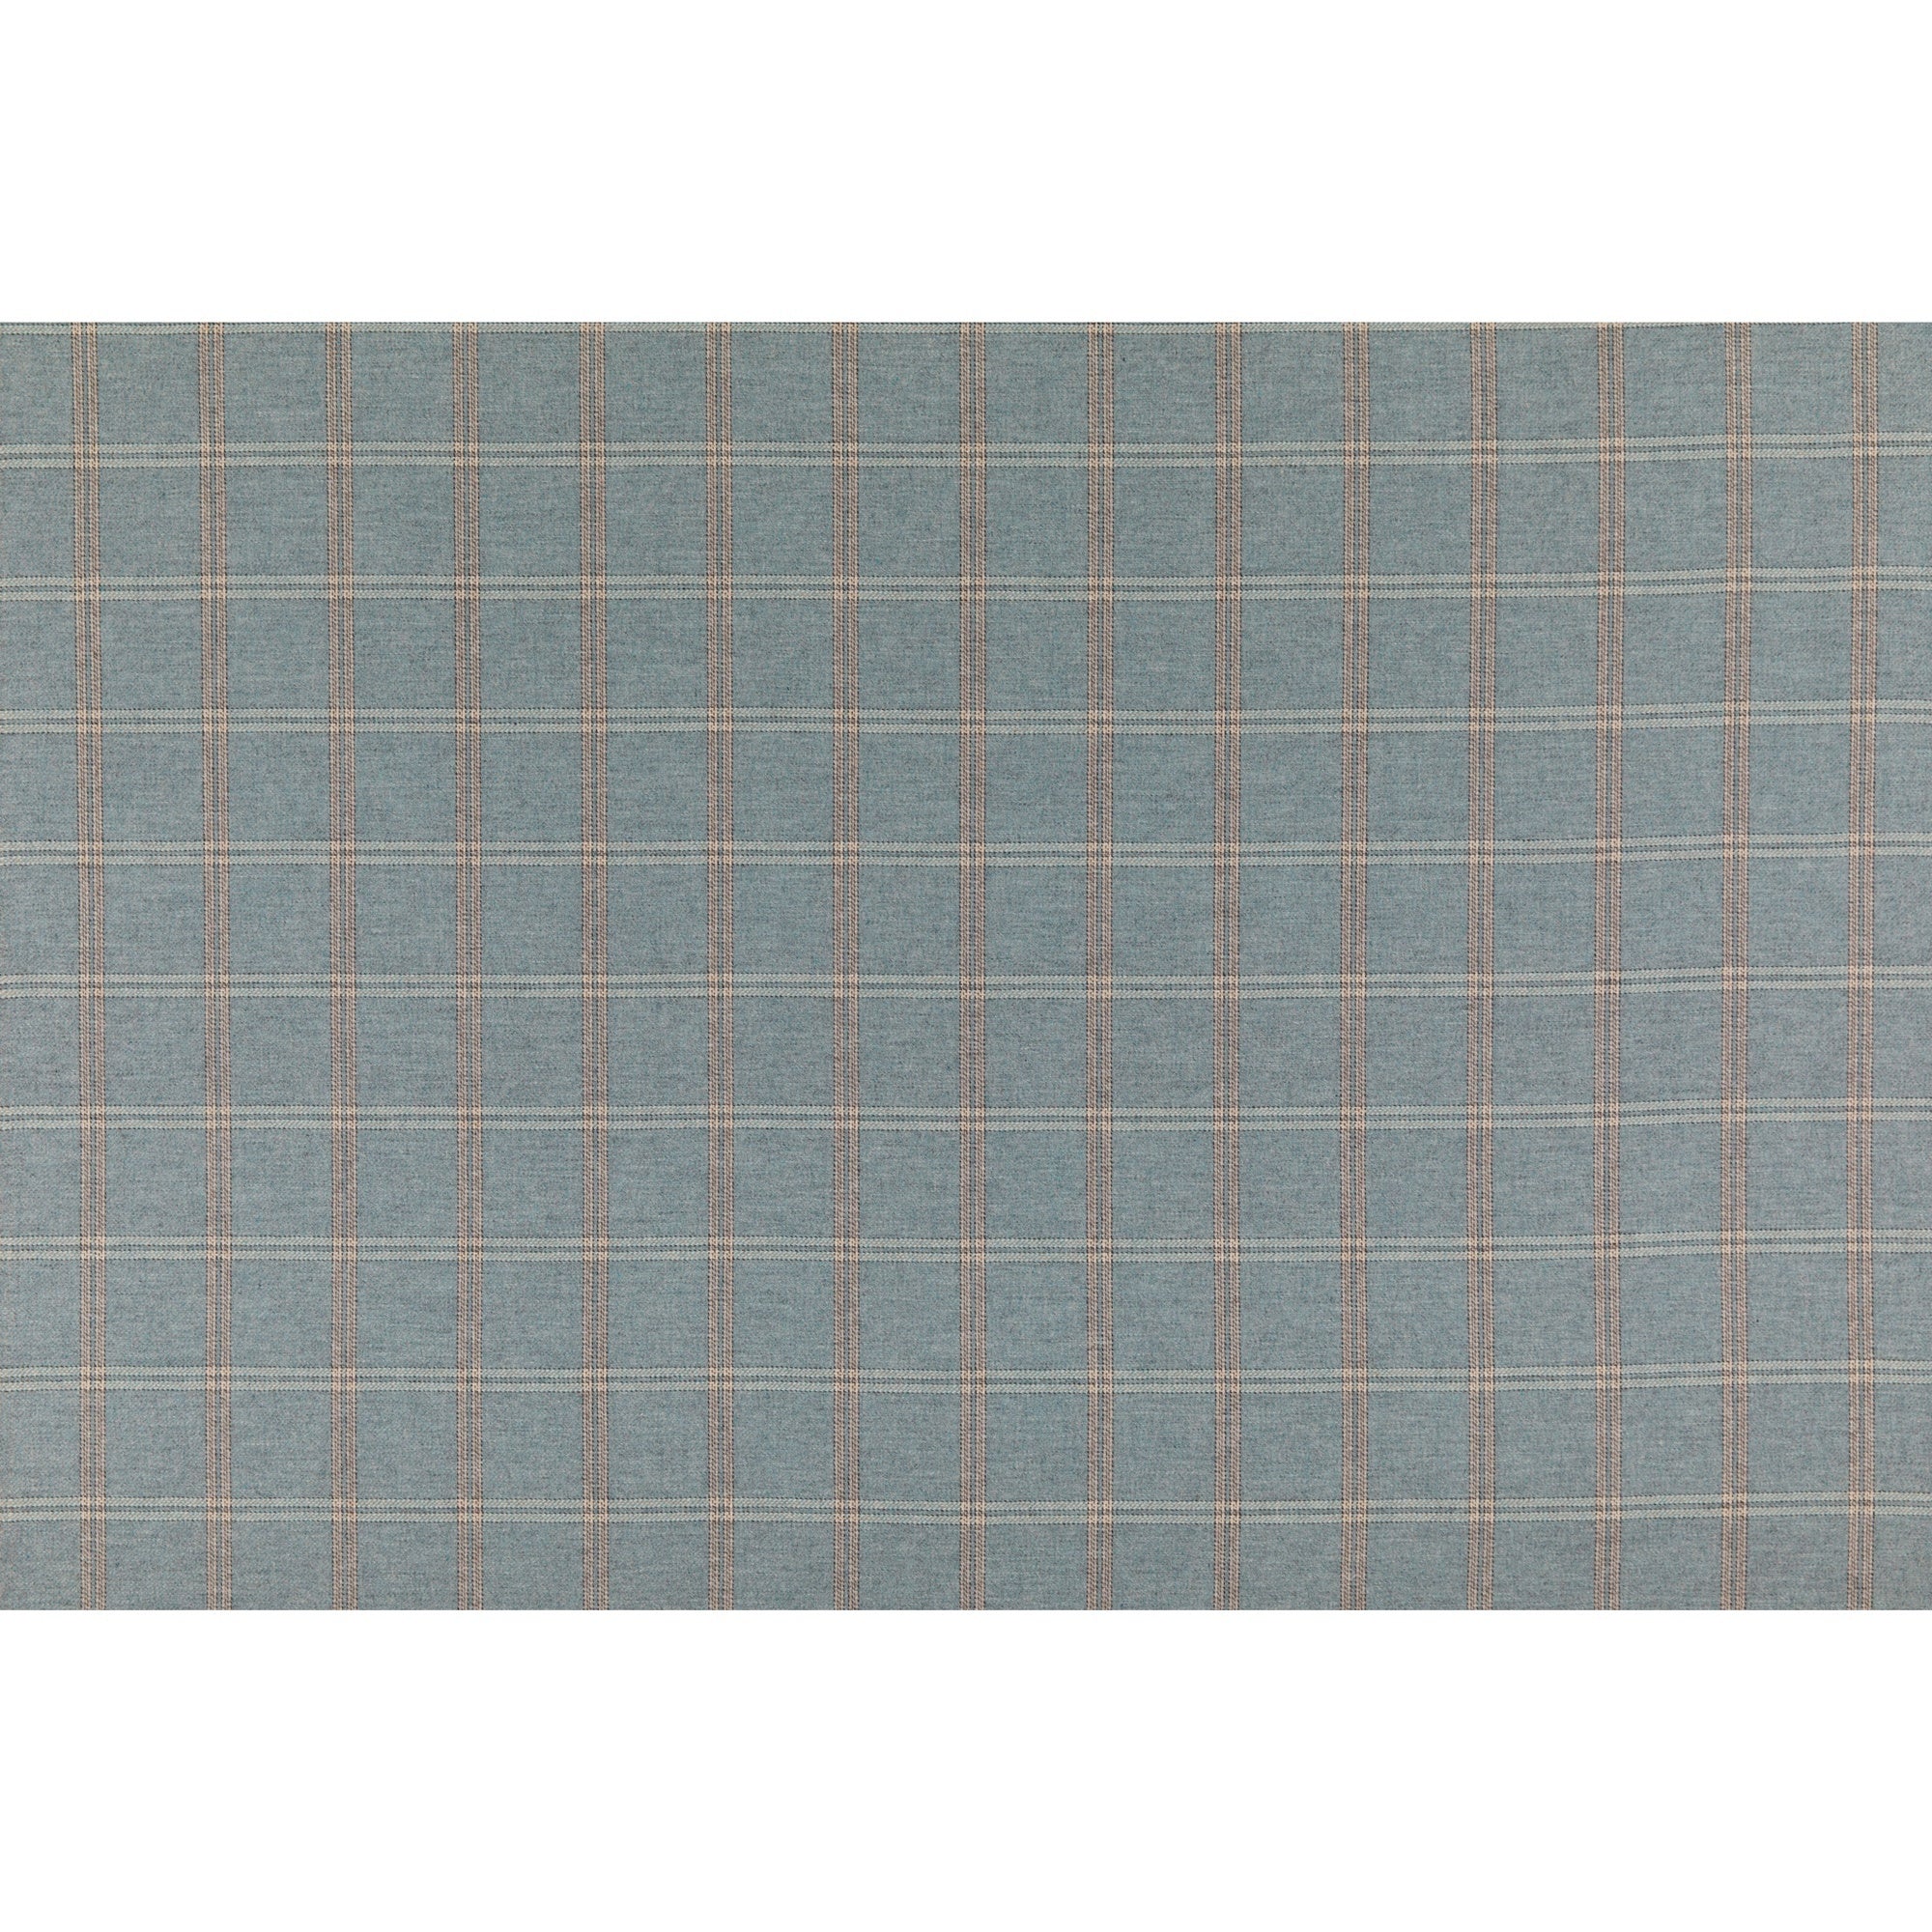 FD775.R41 Walton Soft Teal by Mulberry